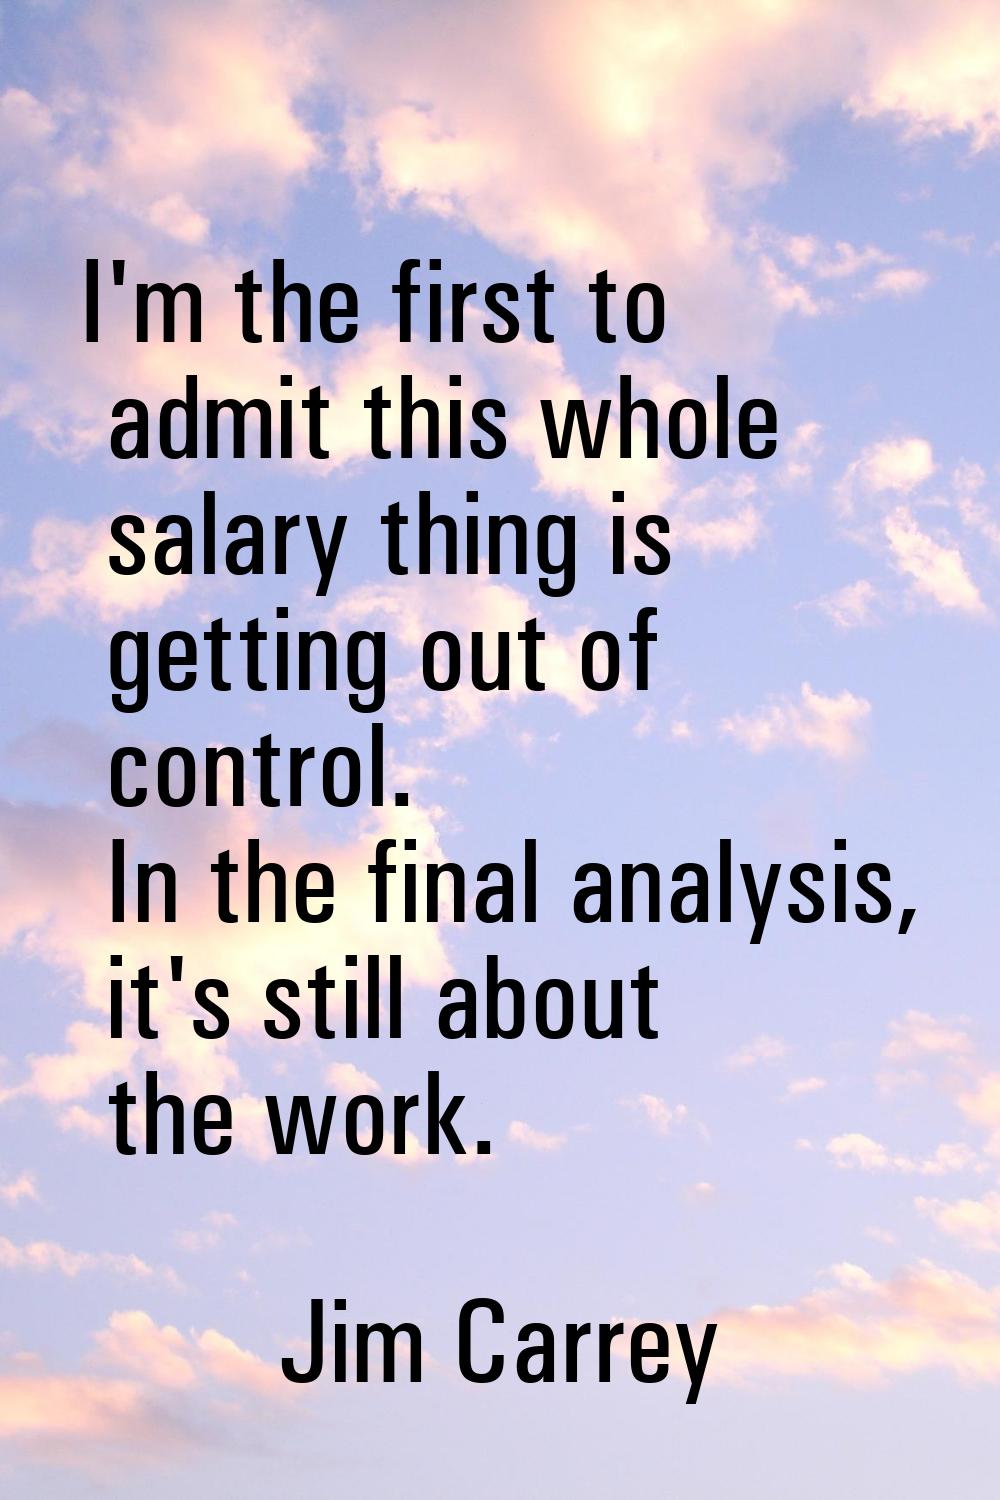 I'm the first to admit this whole salary thing is getting out of control. In the final analysis, it